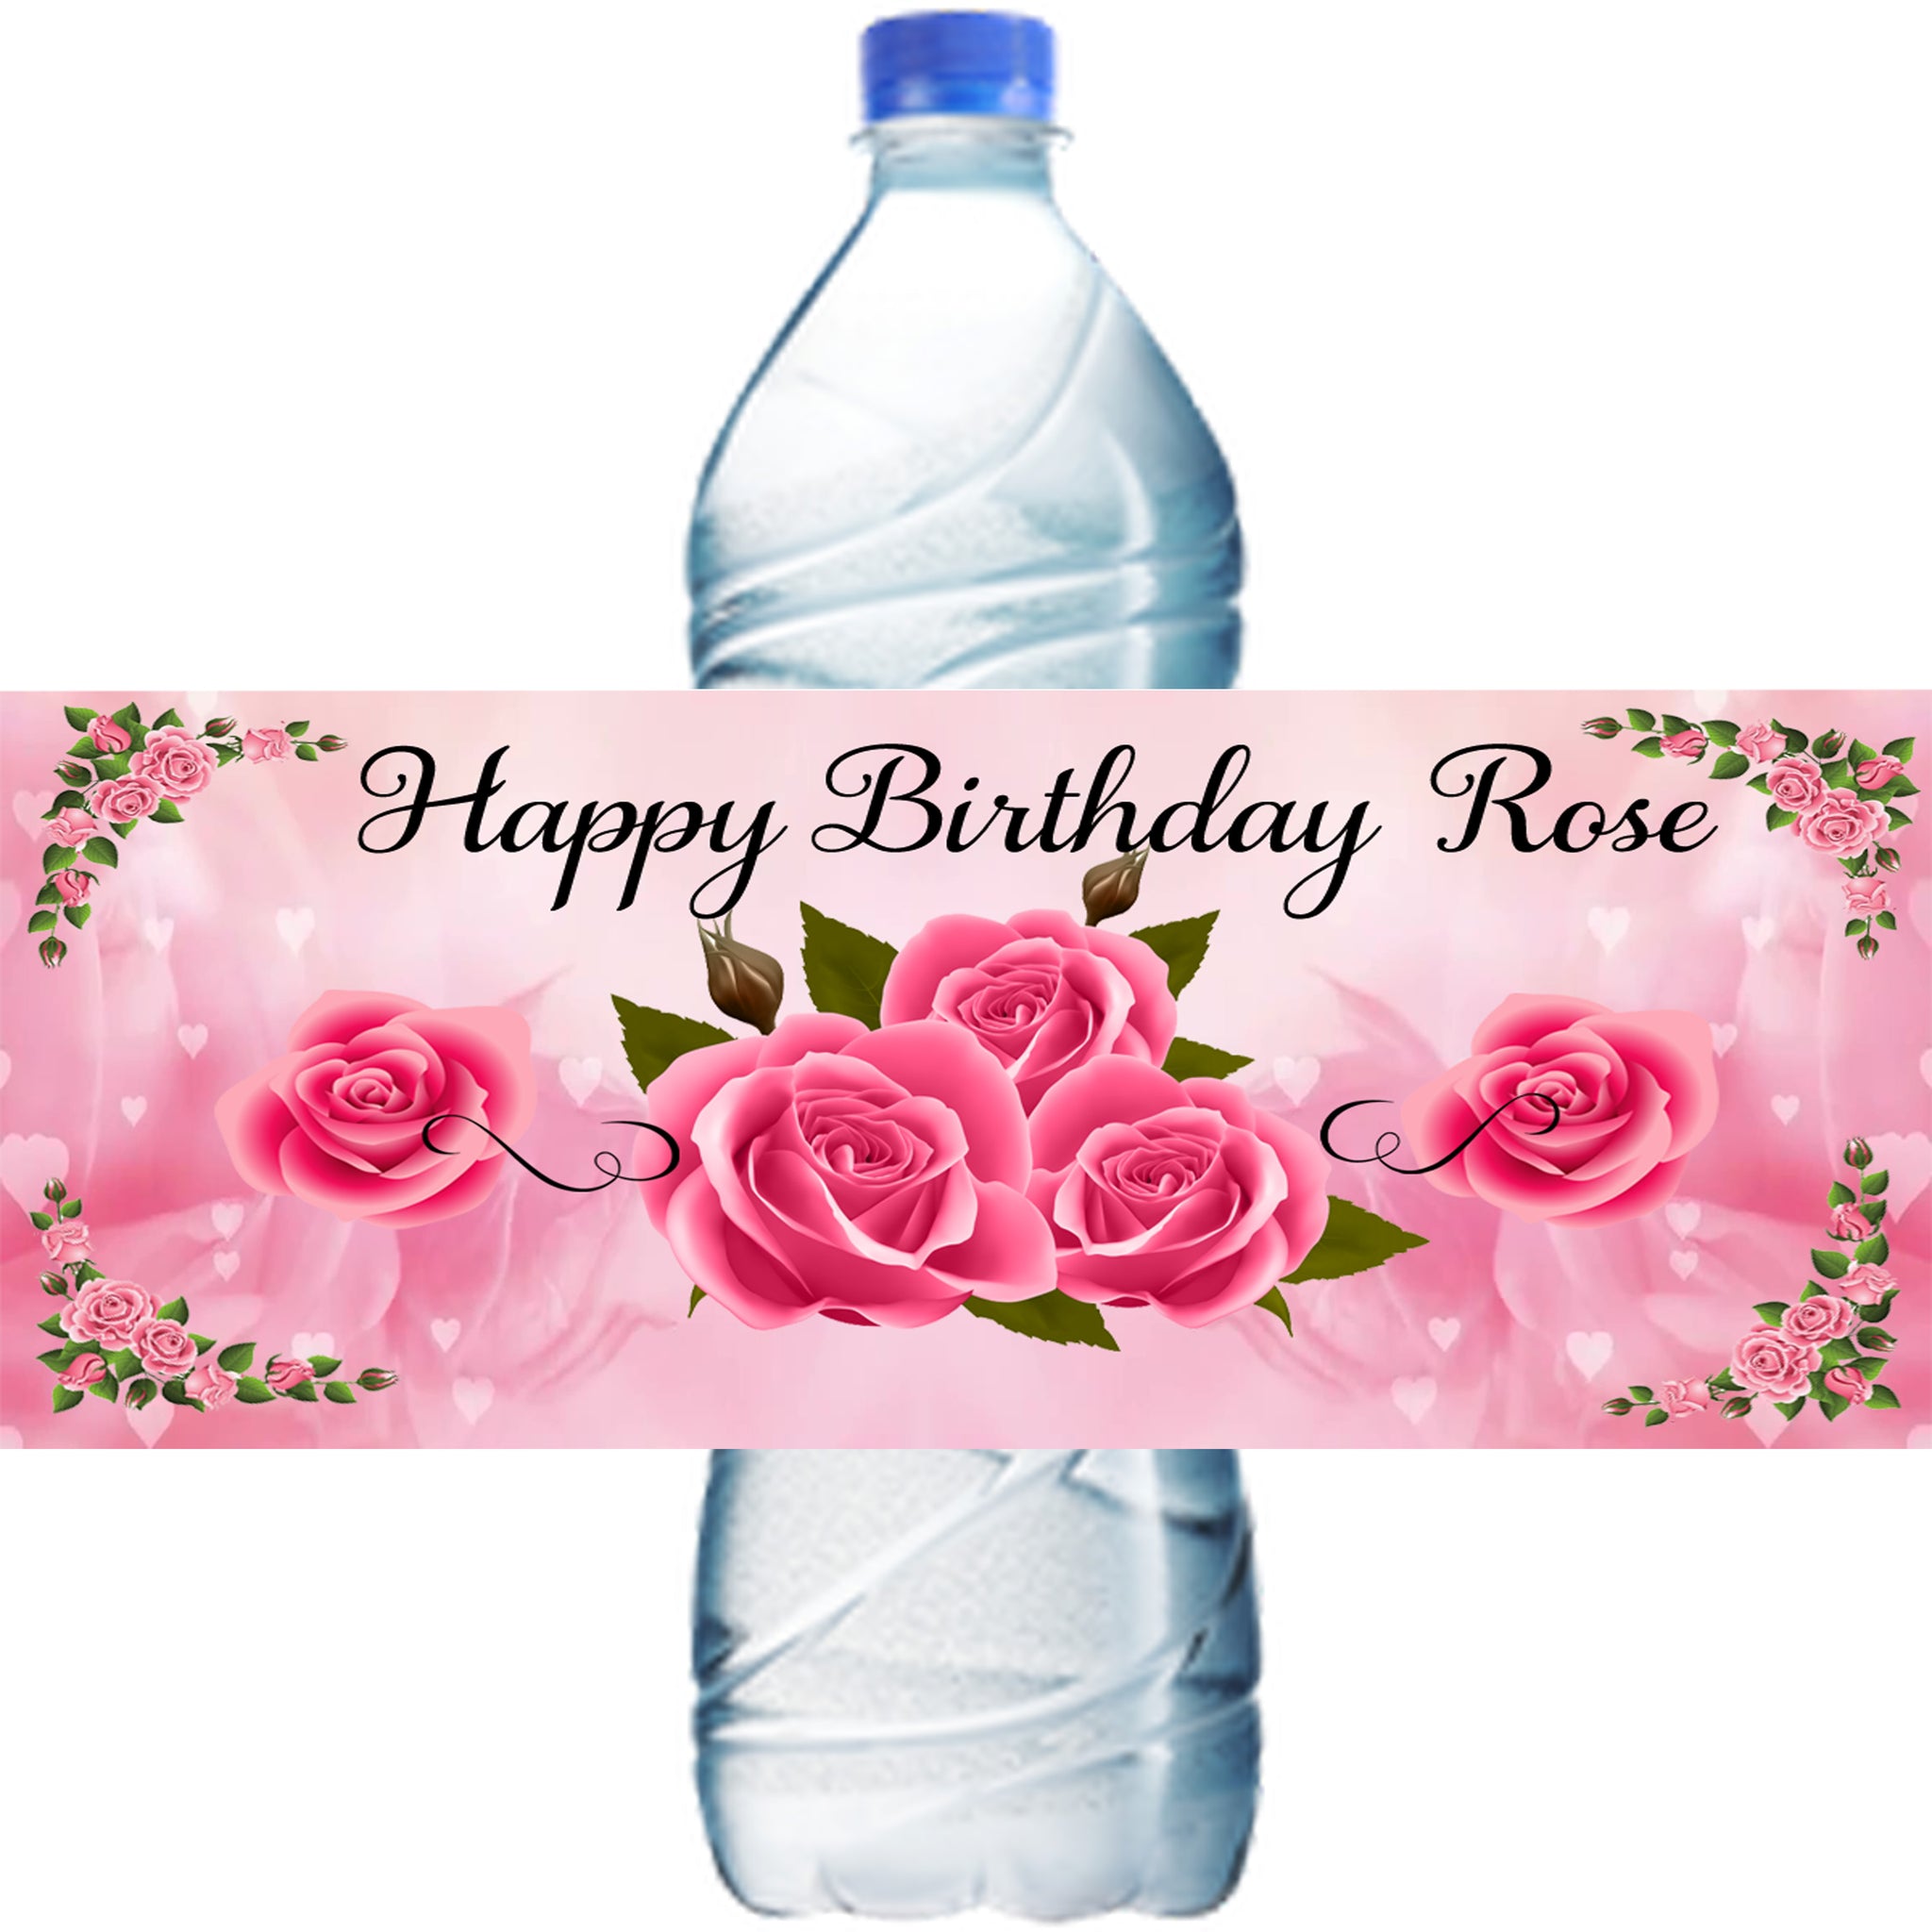 (10) Personalized PINK ROSES Glossy Water Bottle Labels, Party Favors, 2 Sizes